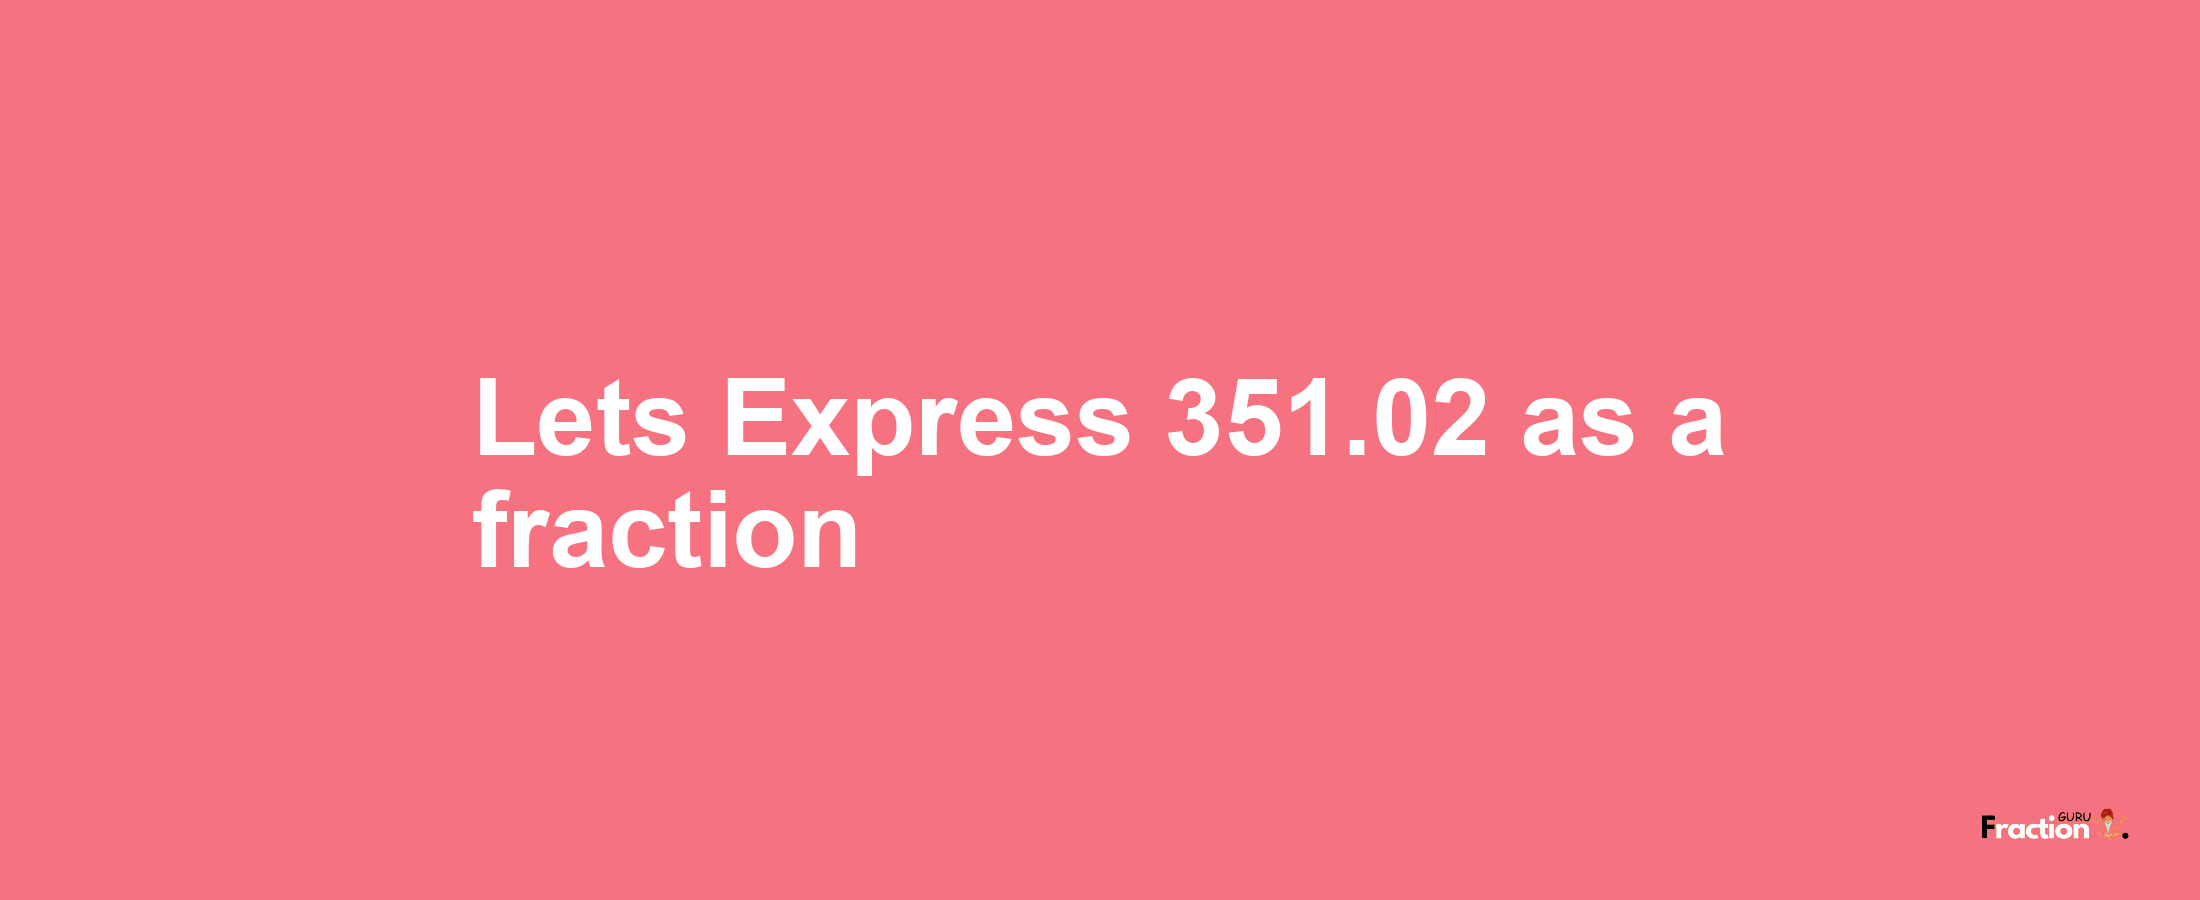 Lets Express 351.02 as afraction